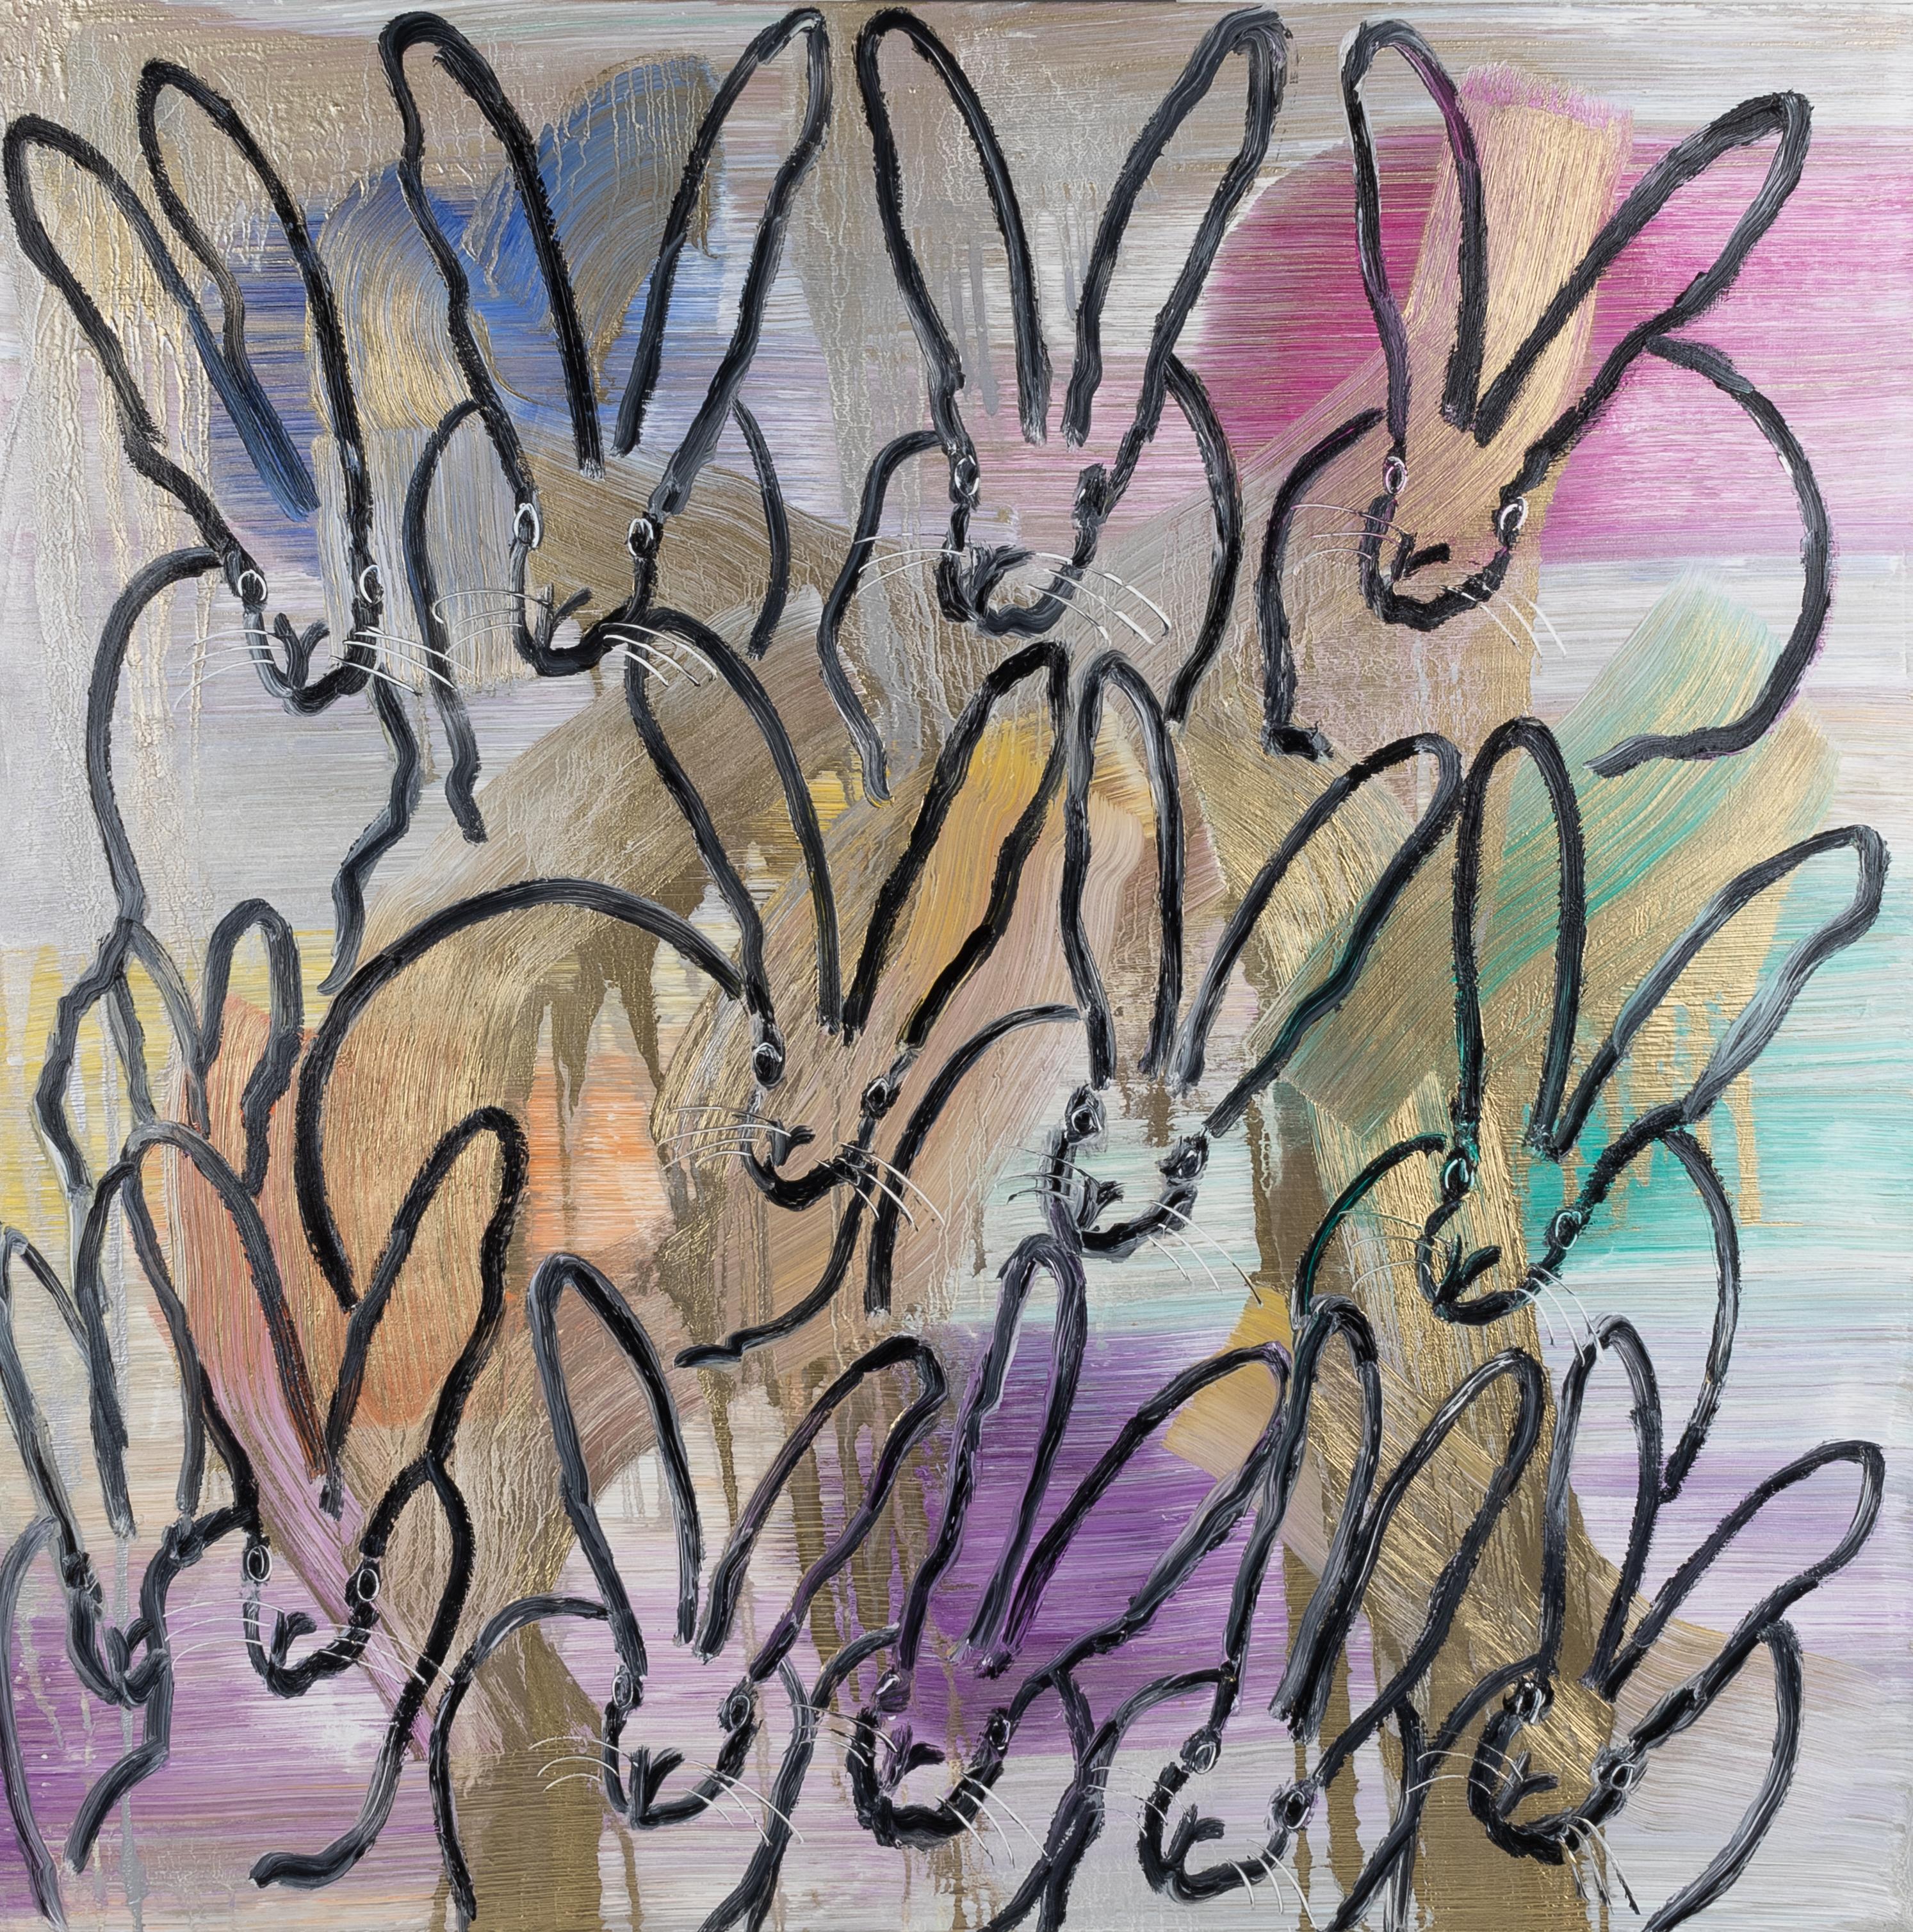 'The Good Earth Chinensis' 2019 by renowned New York City artist, Hunt Slonem. Oil on canvas, 48 x 48 in. This novel ‘bunnies’ painting is influenced by the hustle and bustle, 24 hour a day, irradiant lights of New York City’s Chinatown, where the